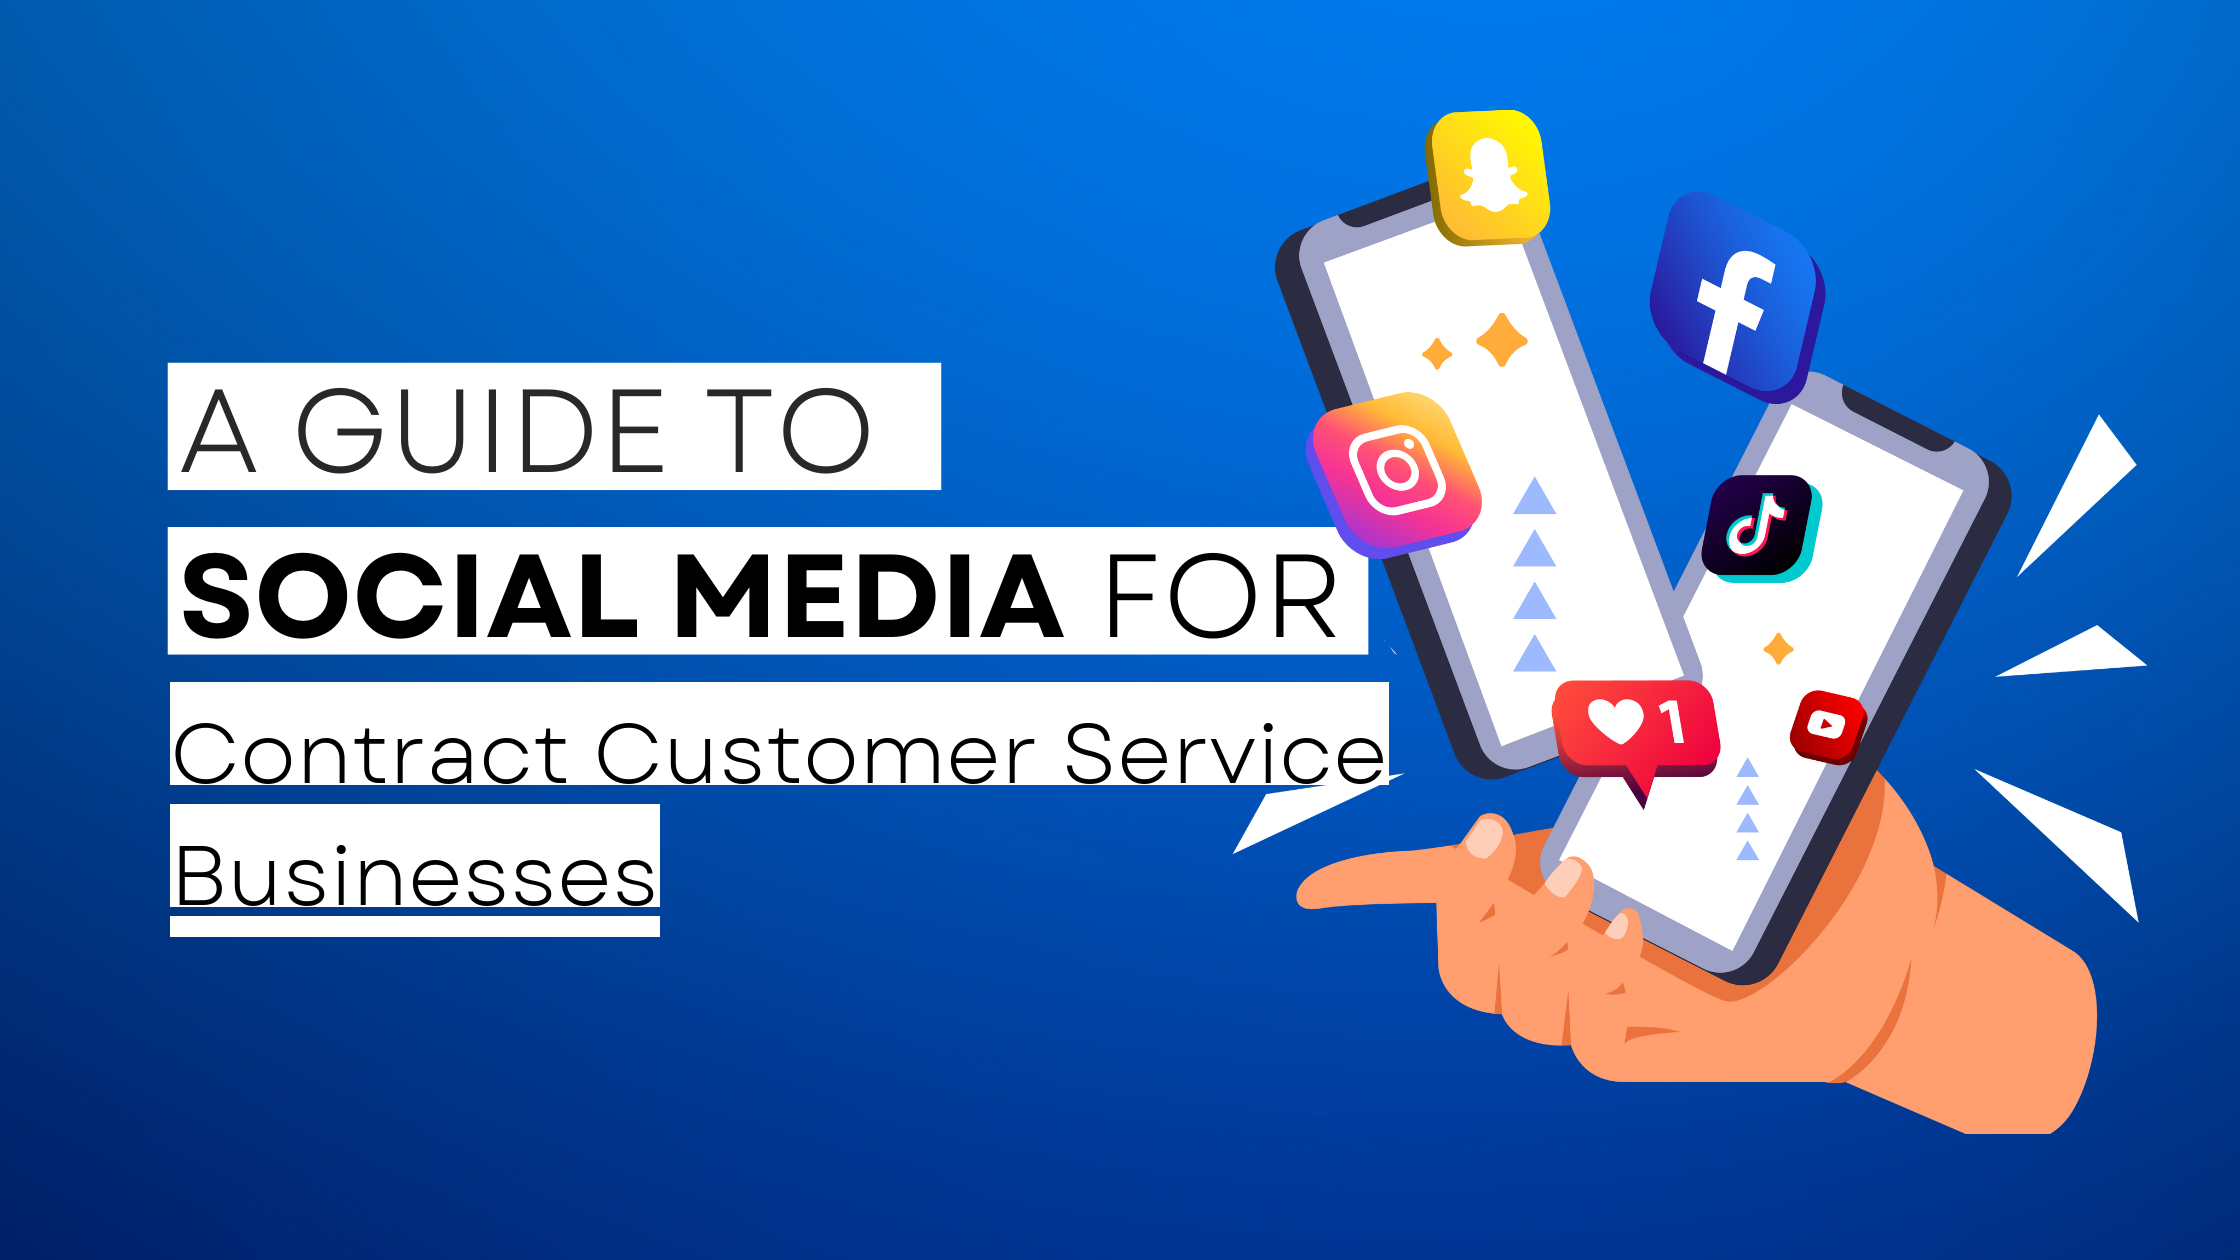 How to start Contract Customer Service on social media